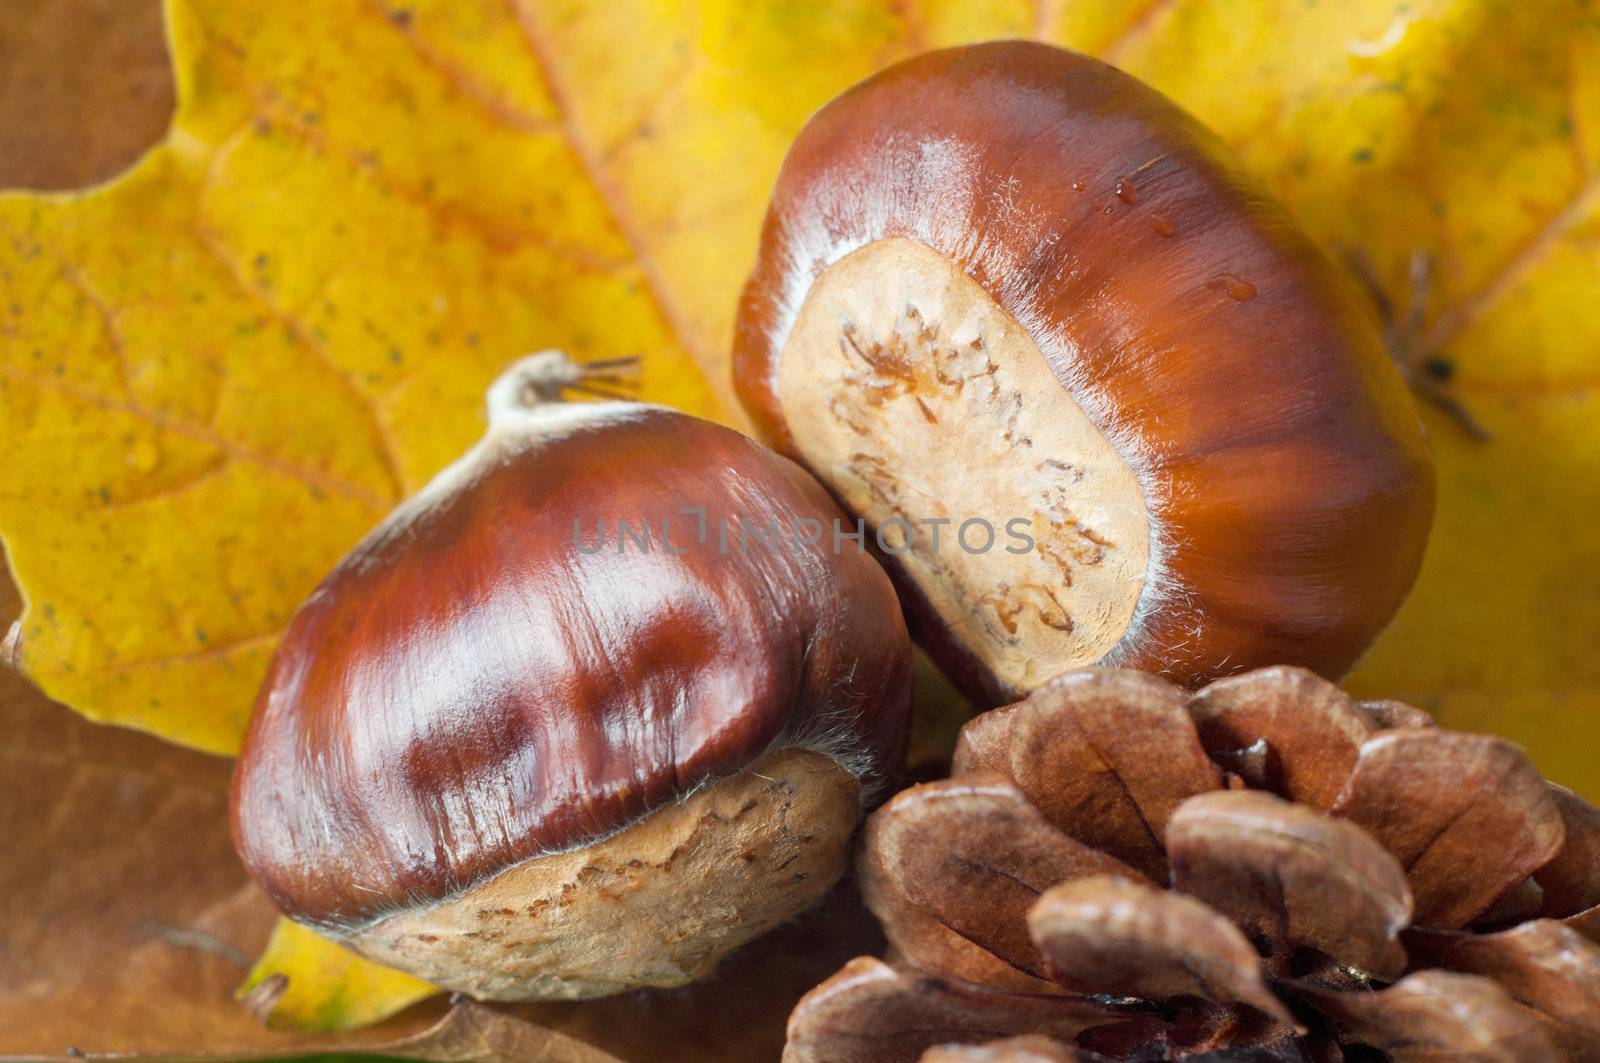 Close up (macro) of Autumn flora, with focus on shiny conkers.  Autumn Sycamore leaves in soft focus background and a fir cone at the fore.